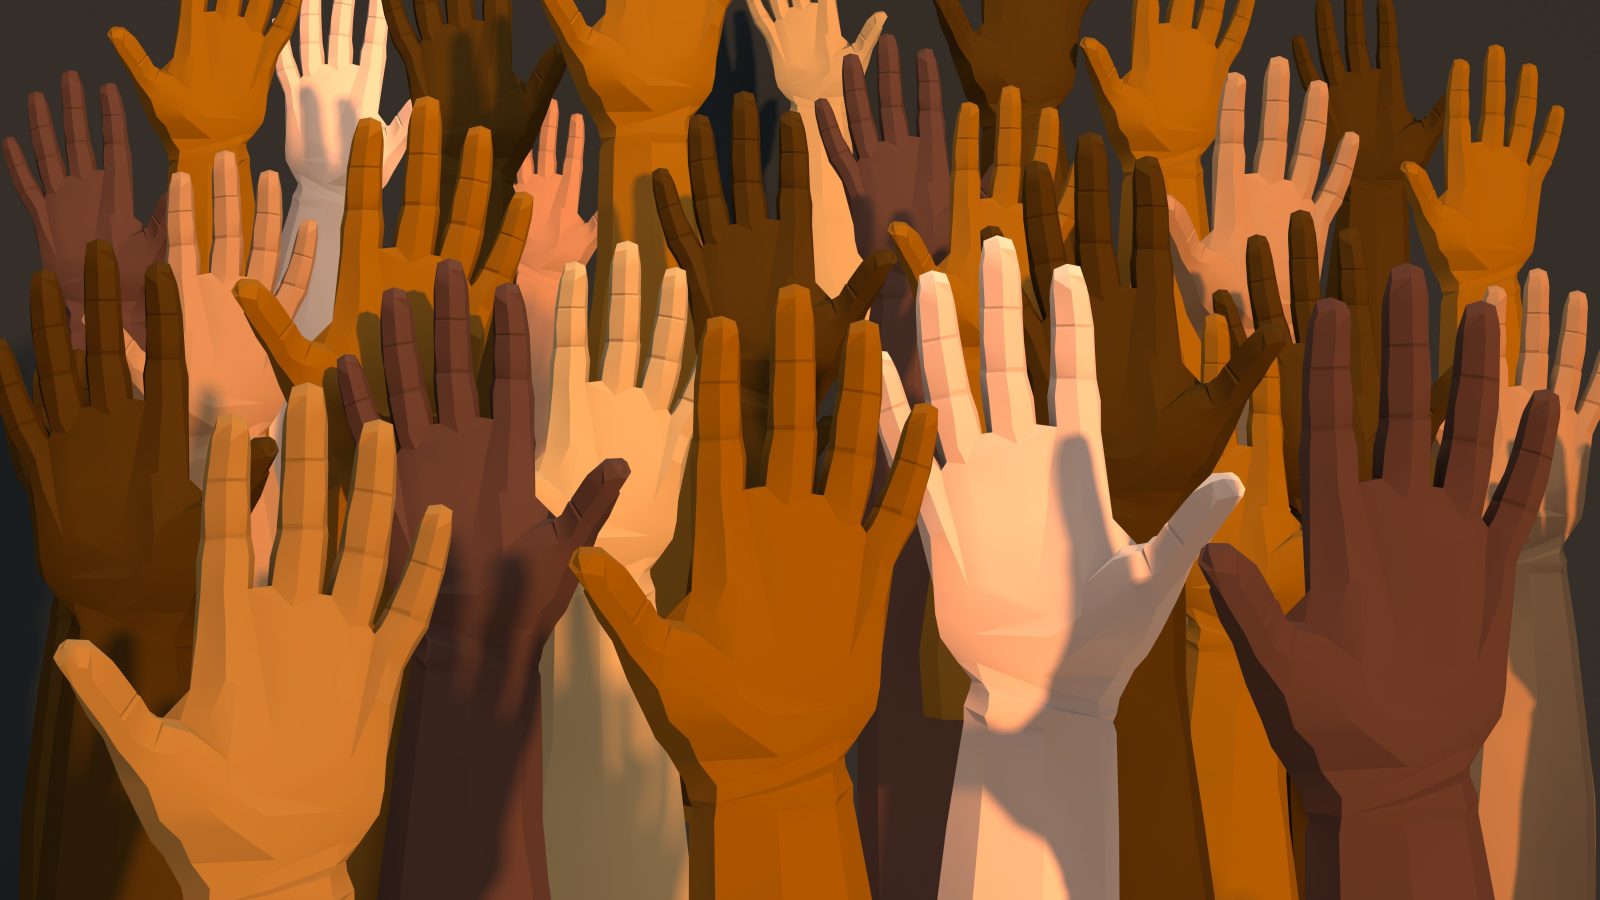 Digital generated image of multi-ethnic arms raised in the air on dark gray background.